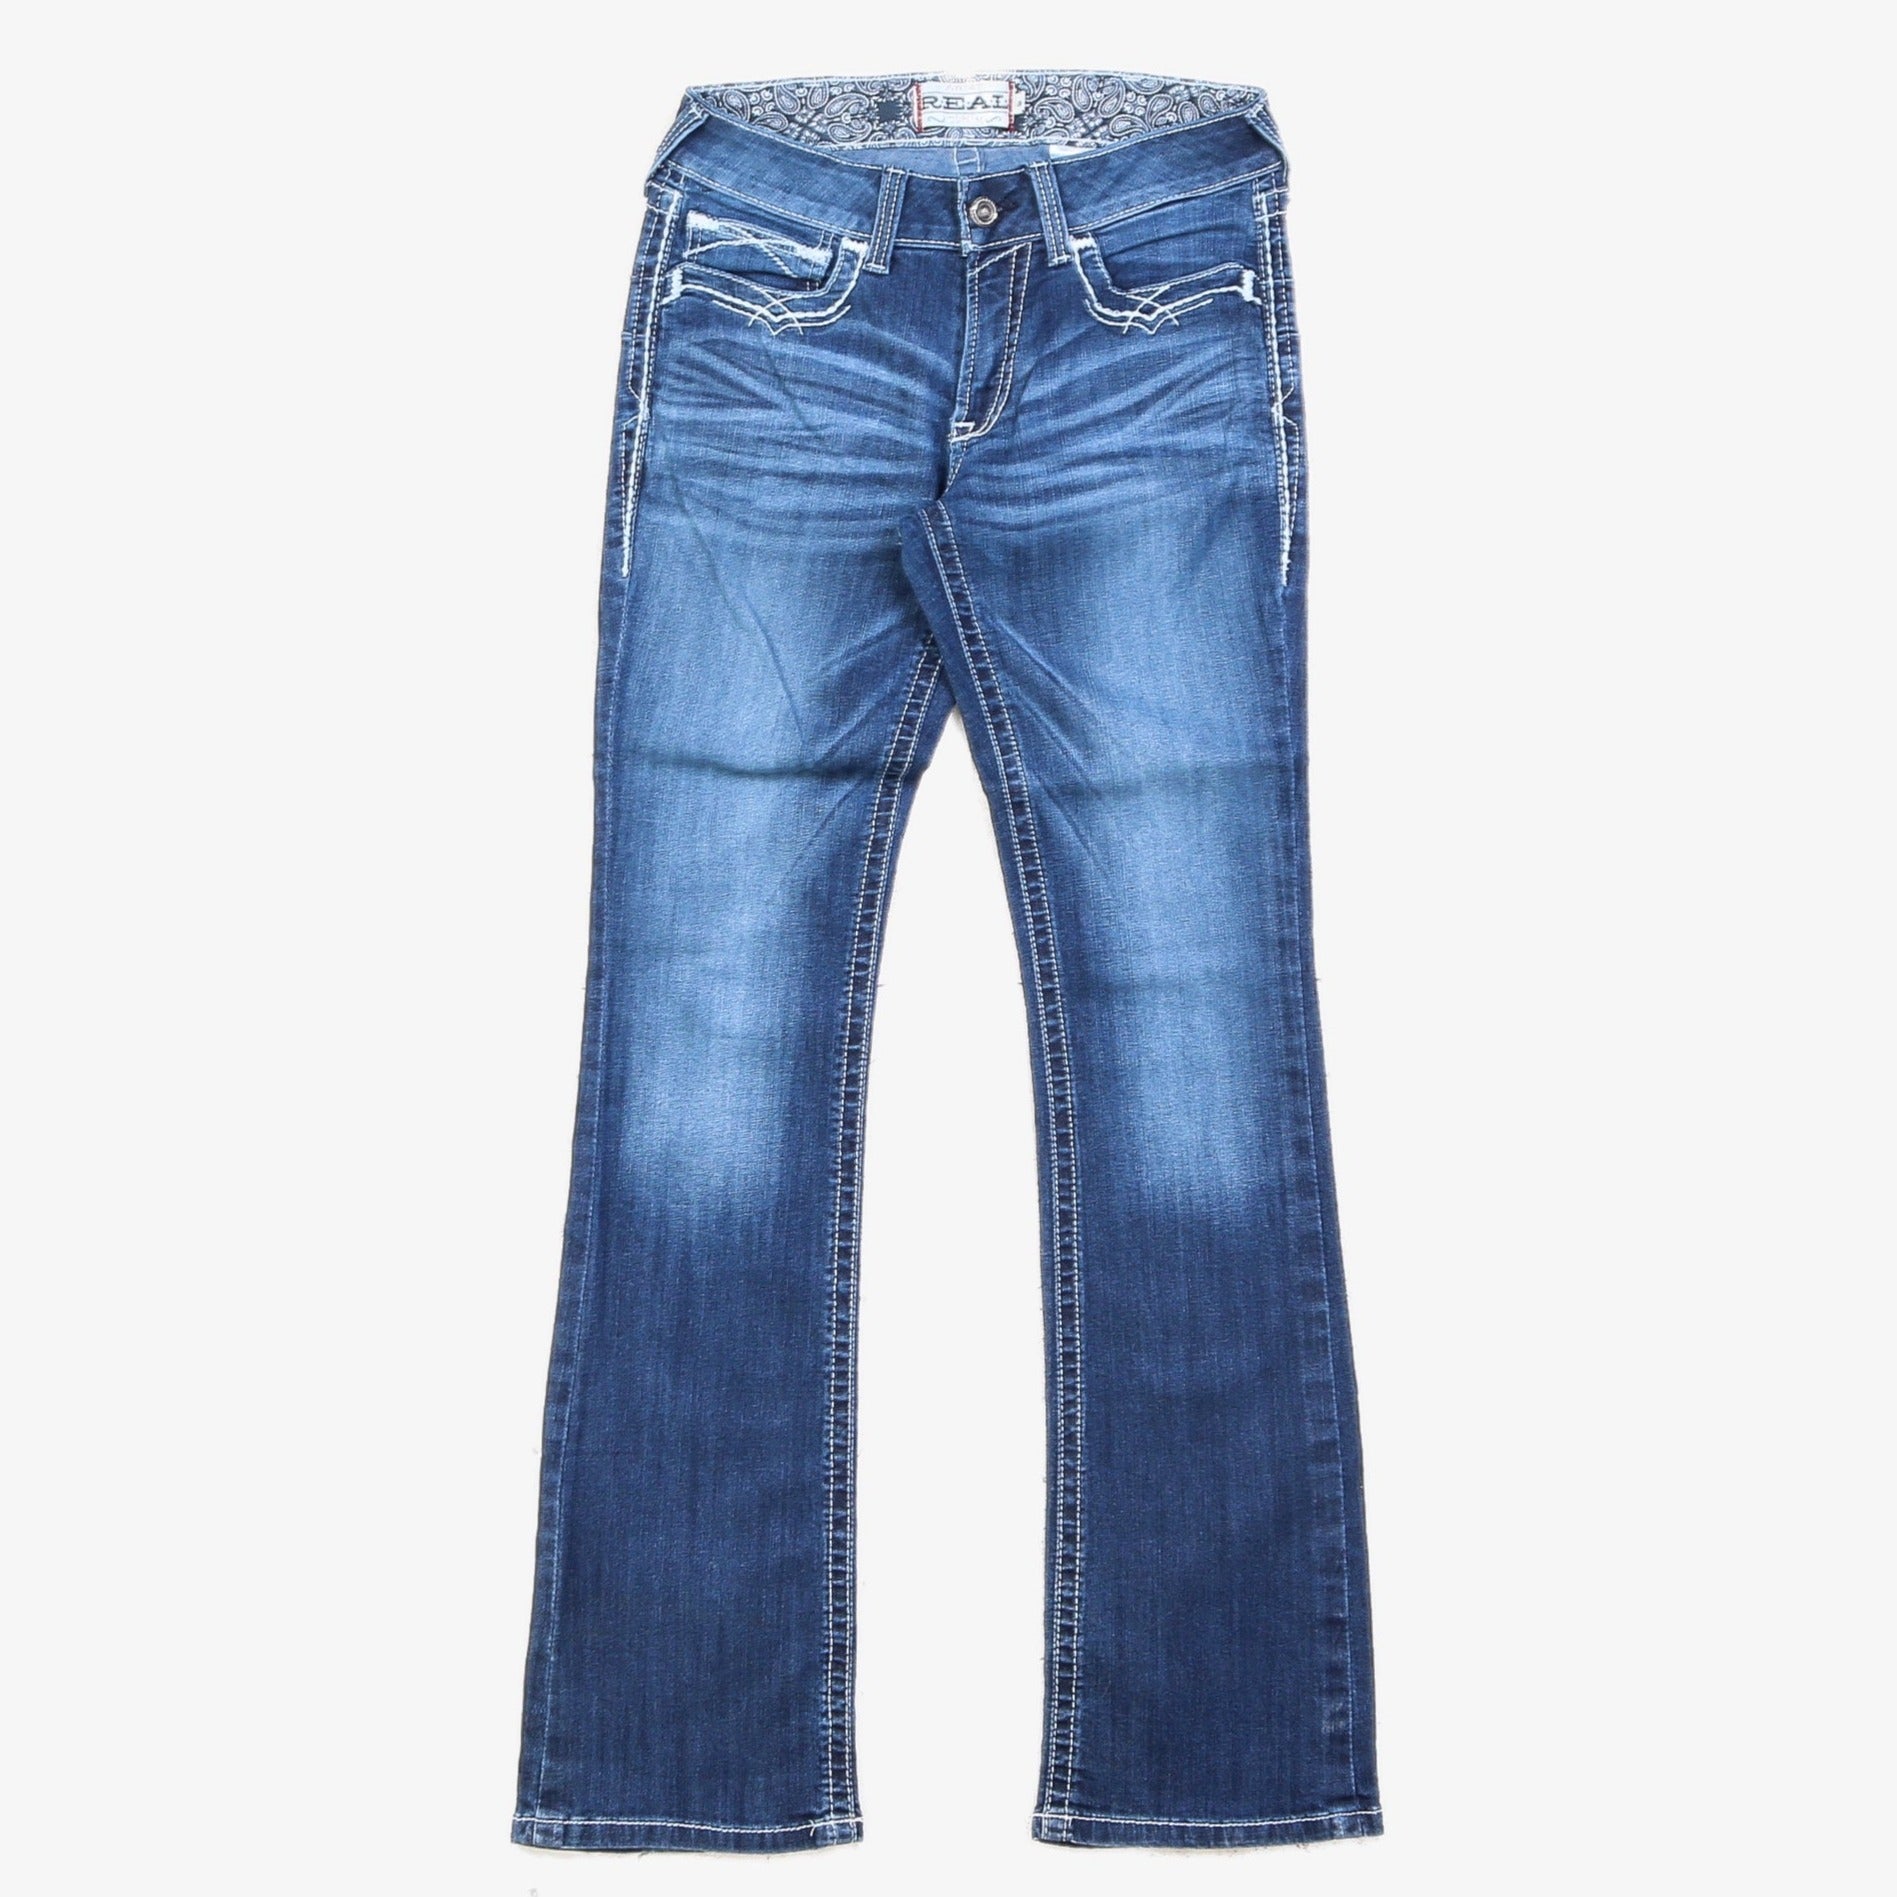 Ariat Real Denim Jeans - 30" - American Madness